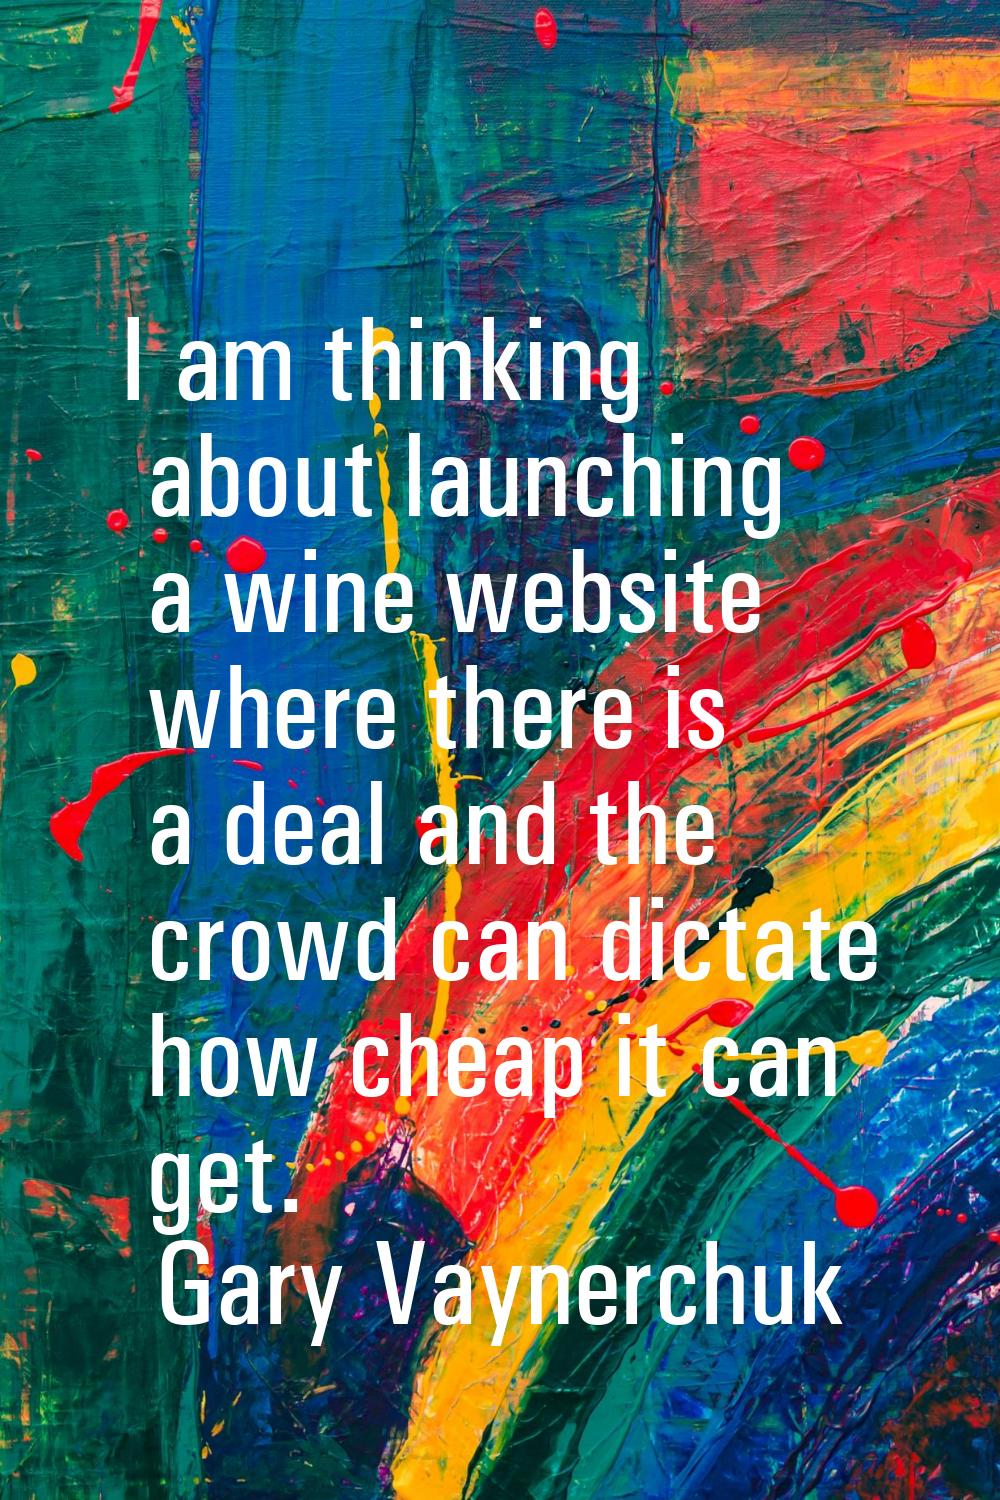 I am thinking about launching a wine website where there is a deal and the crowd can dictate how ch